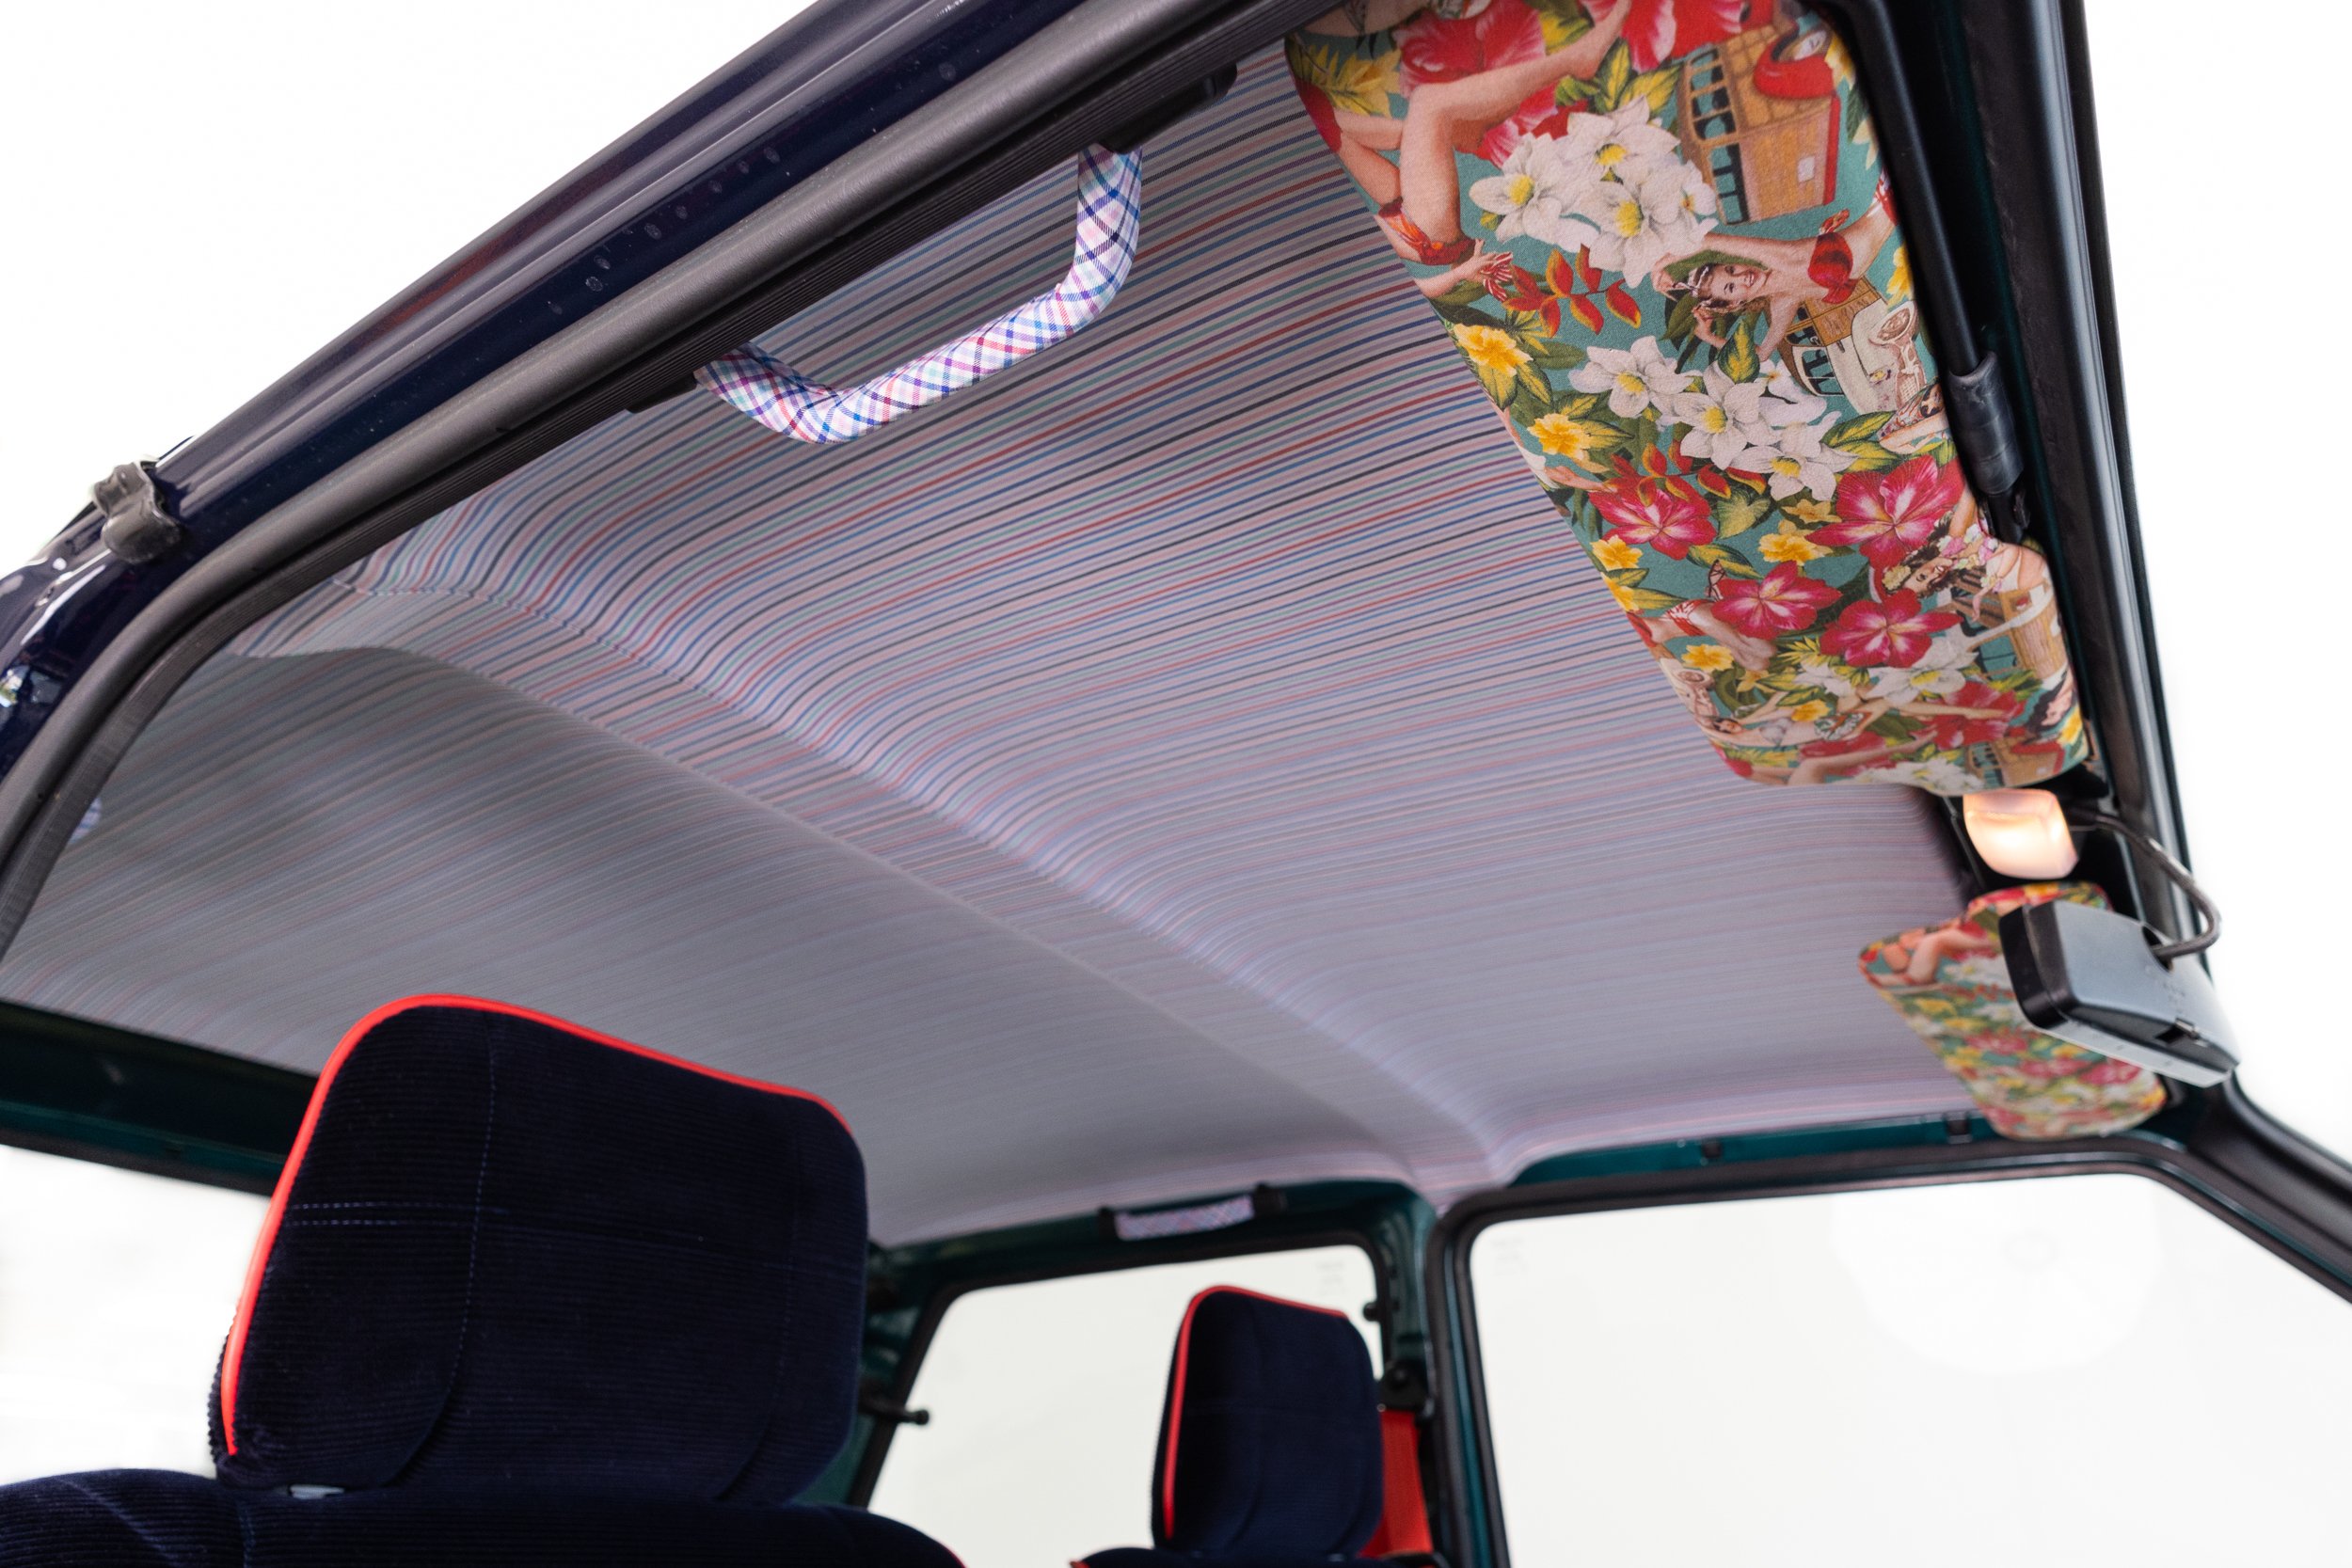 Fiat Panda 4X4 Tailored Interior — O'Rourke Coachtrimmers & Supplies